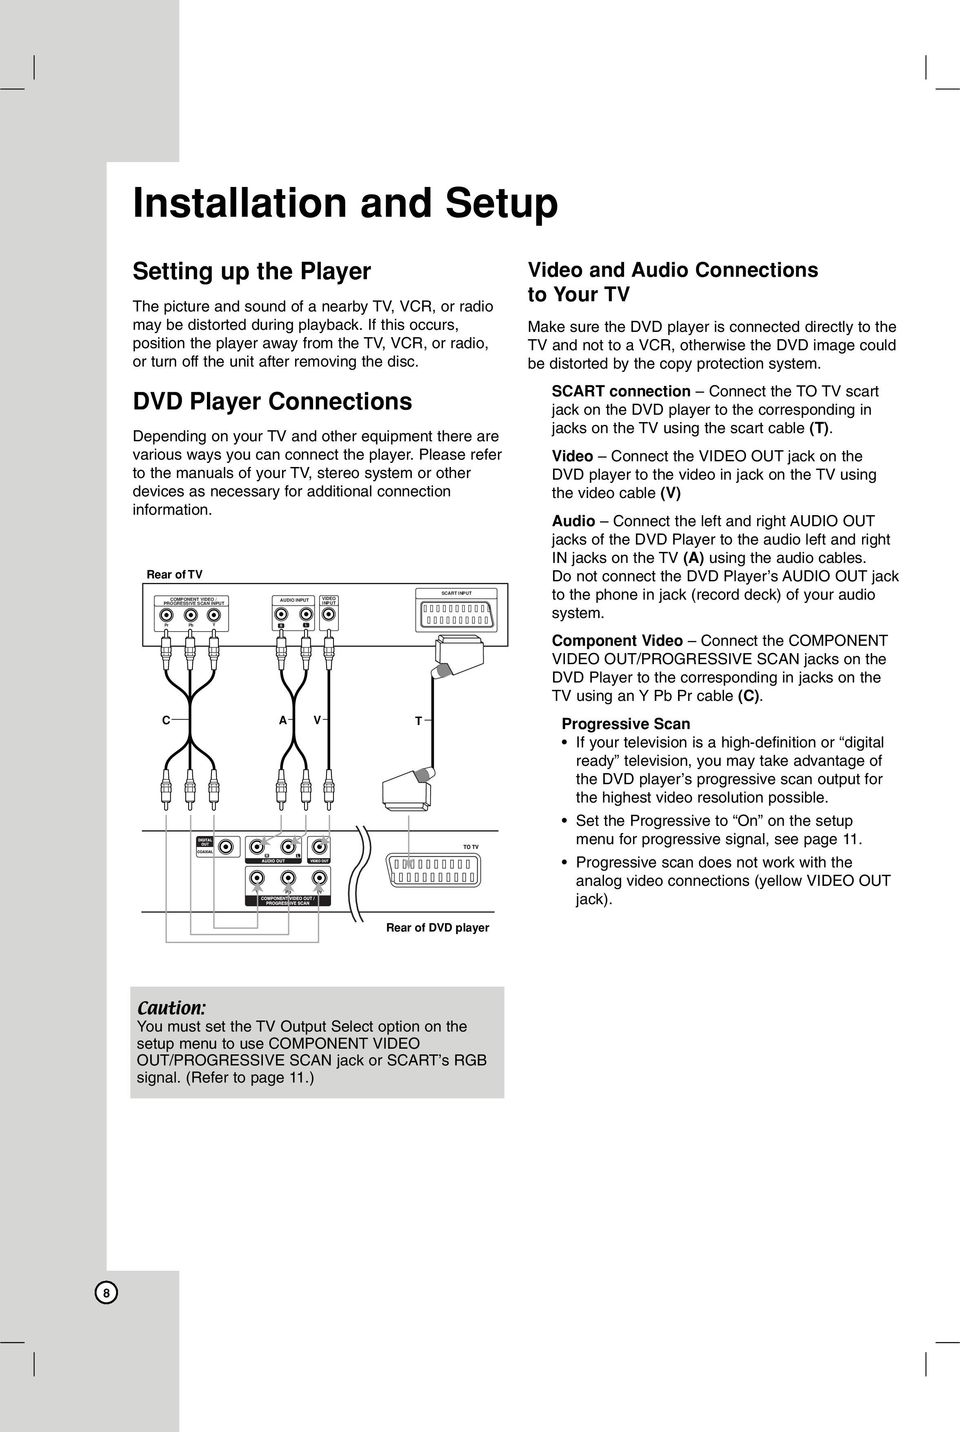 Player Connections Depending on your TV and other equipment there are various ways you can connect the player.